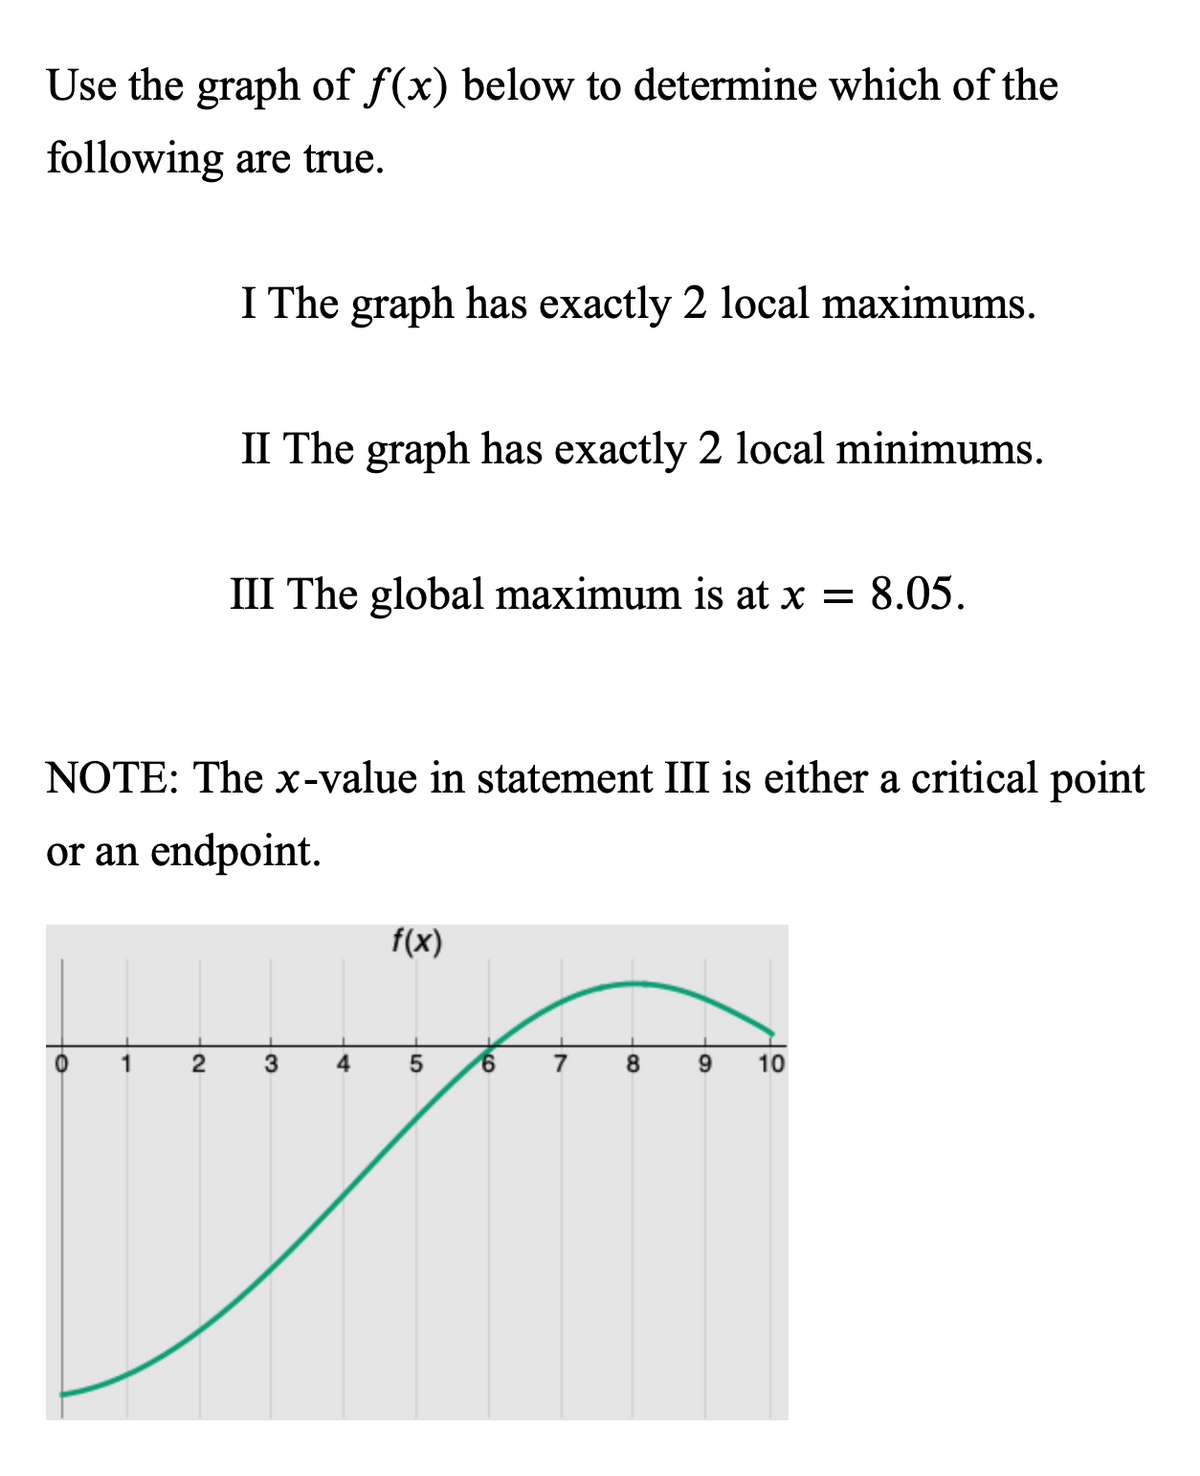 Use the graph of f(x) below to determine which of the
following are true.
I The graph has exactly 2 local maximums.
II The graph has exactly 2 local minimums.
III The global maximum is at x = 8.05.
NOTE: The x-value in statement III is either a critical point
or an endpoint.
f(x)
1
3
7
8
10
